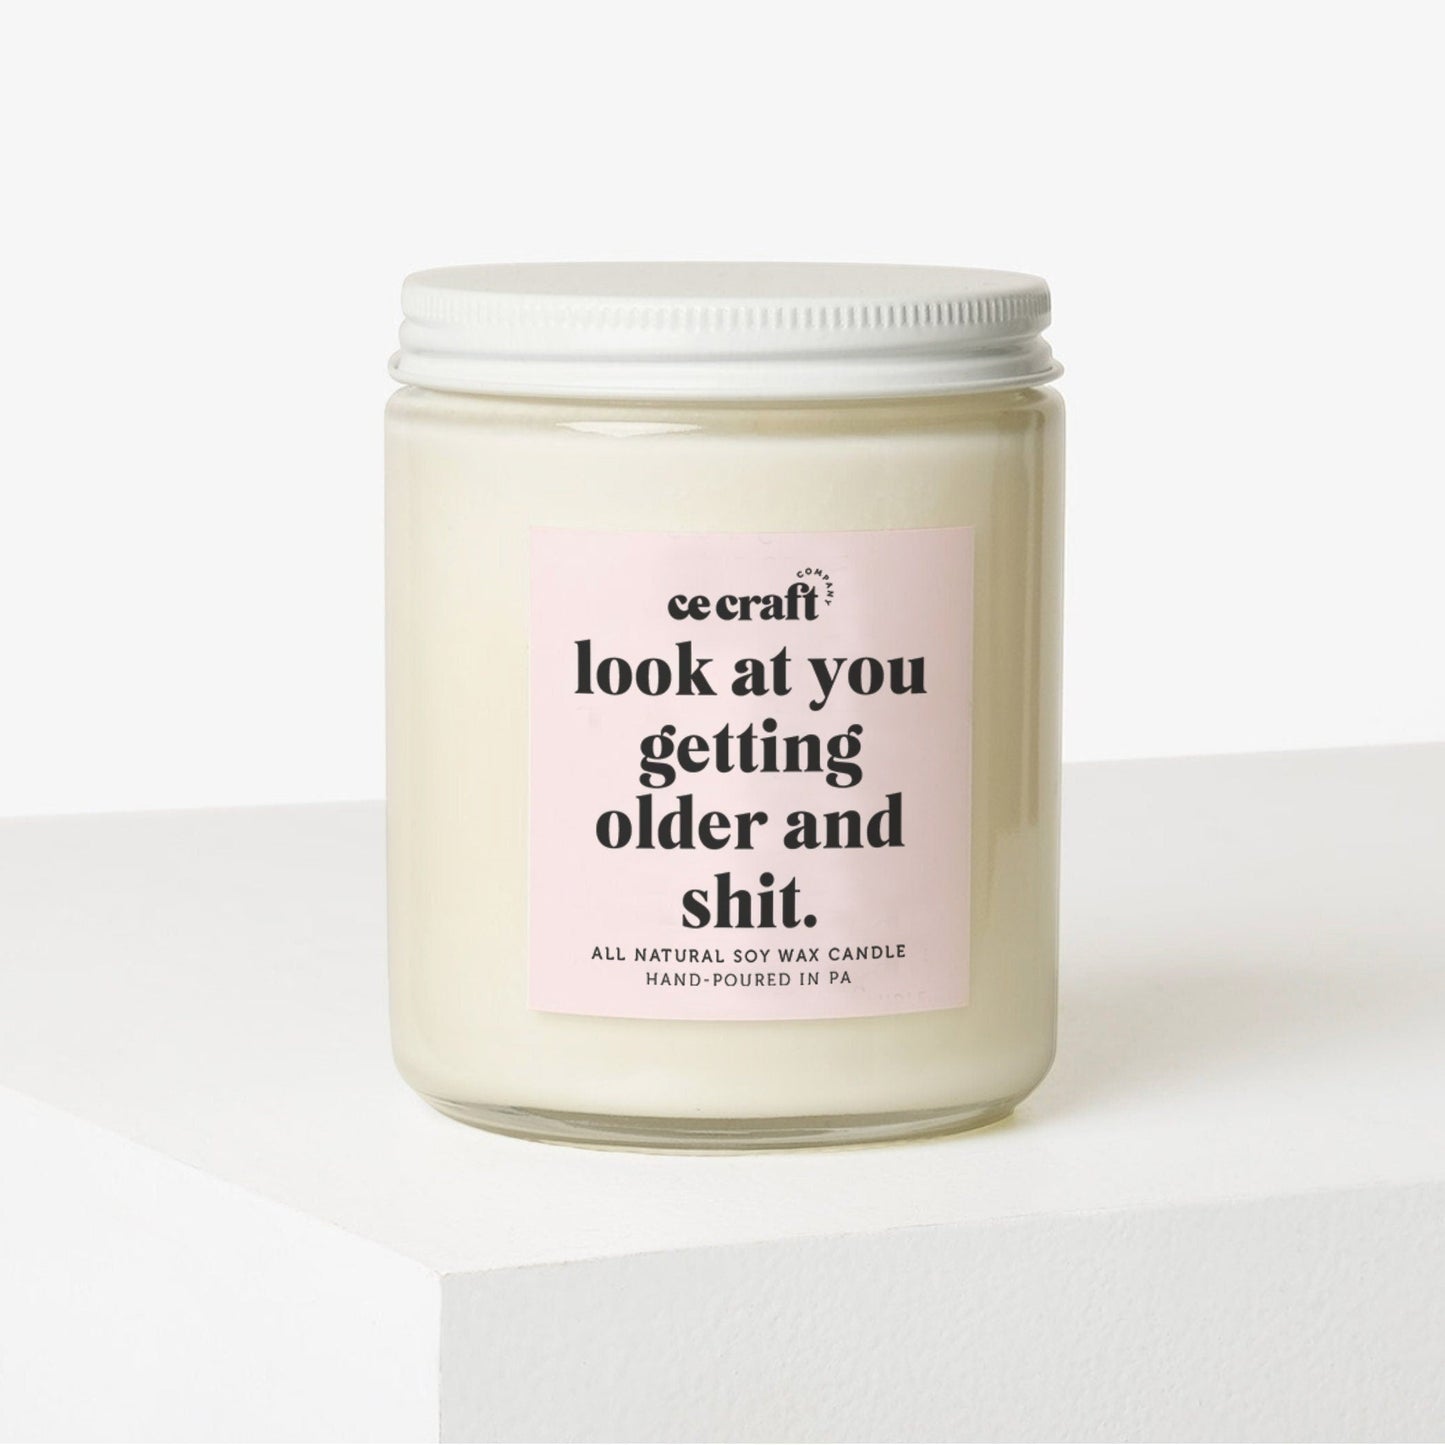 Look at You Getting Older and Shit Soy Wax Candle C & E Craft Co 